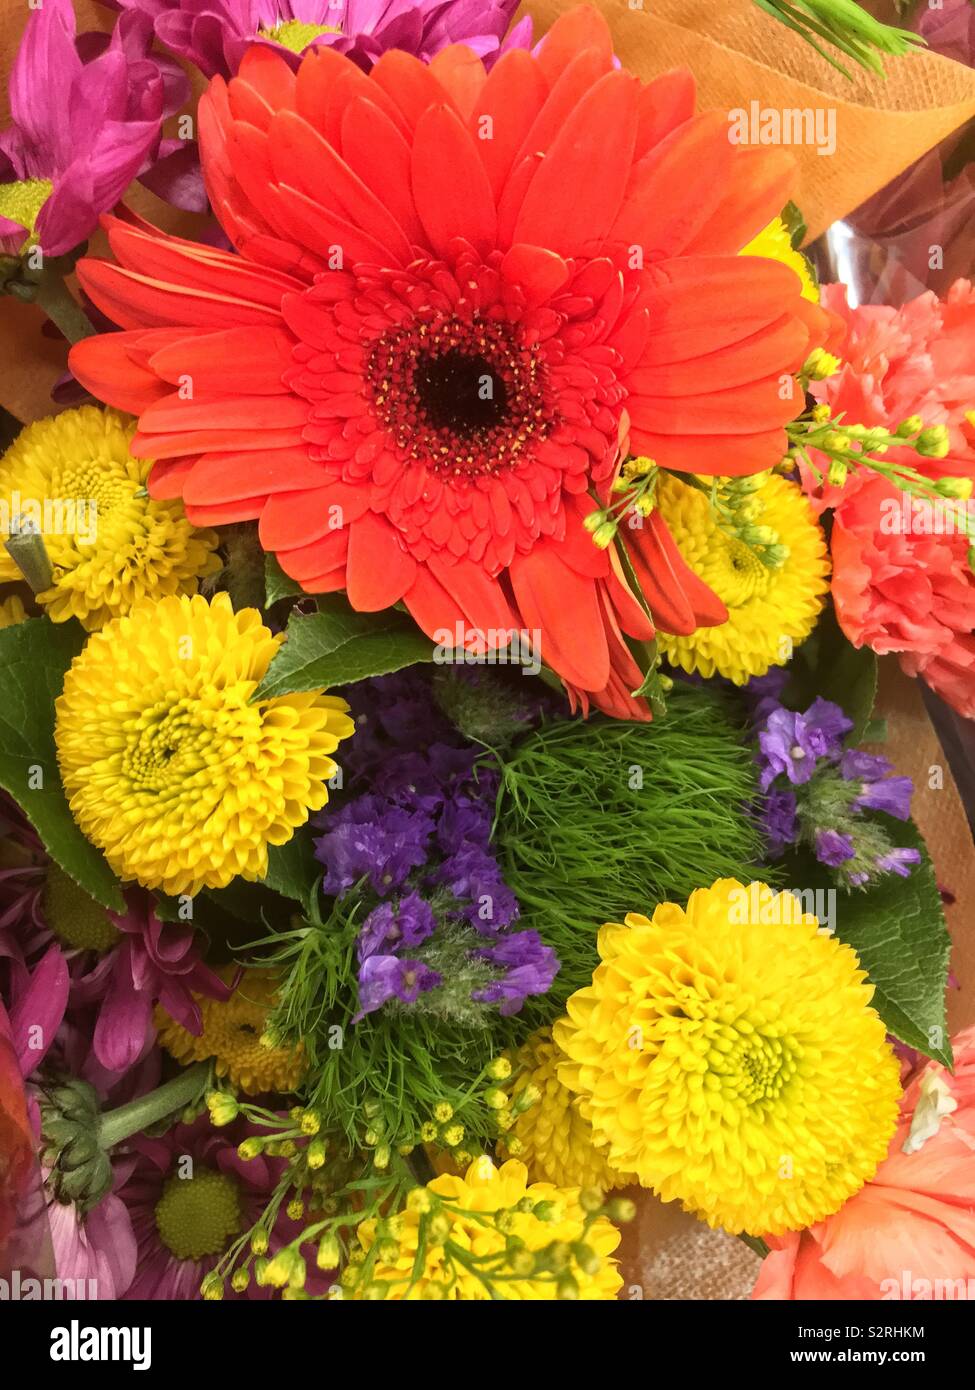 Fragrant bouquet of colorful summer blossoms including a bright daisy and yellow zinnias. Stock Photo